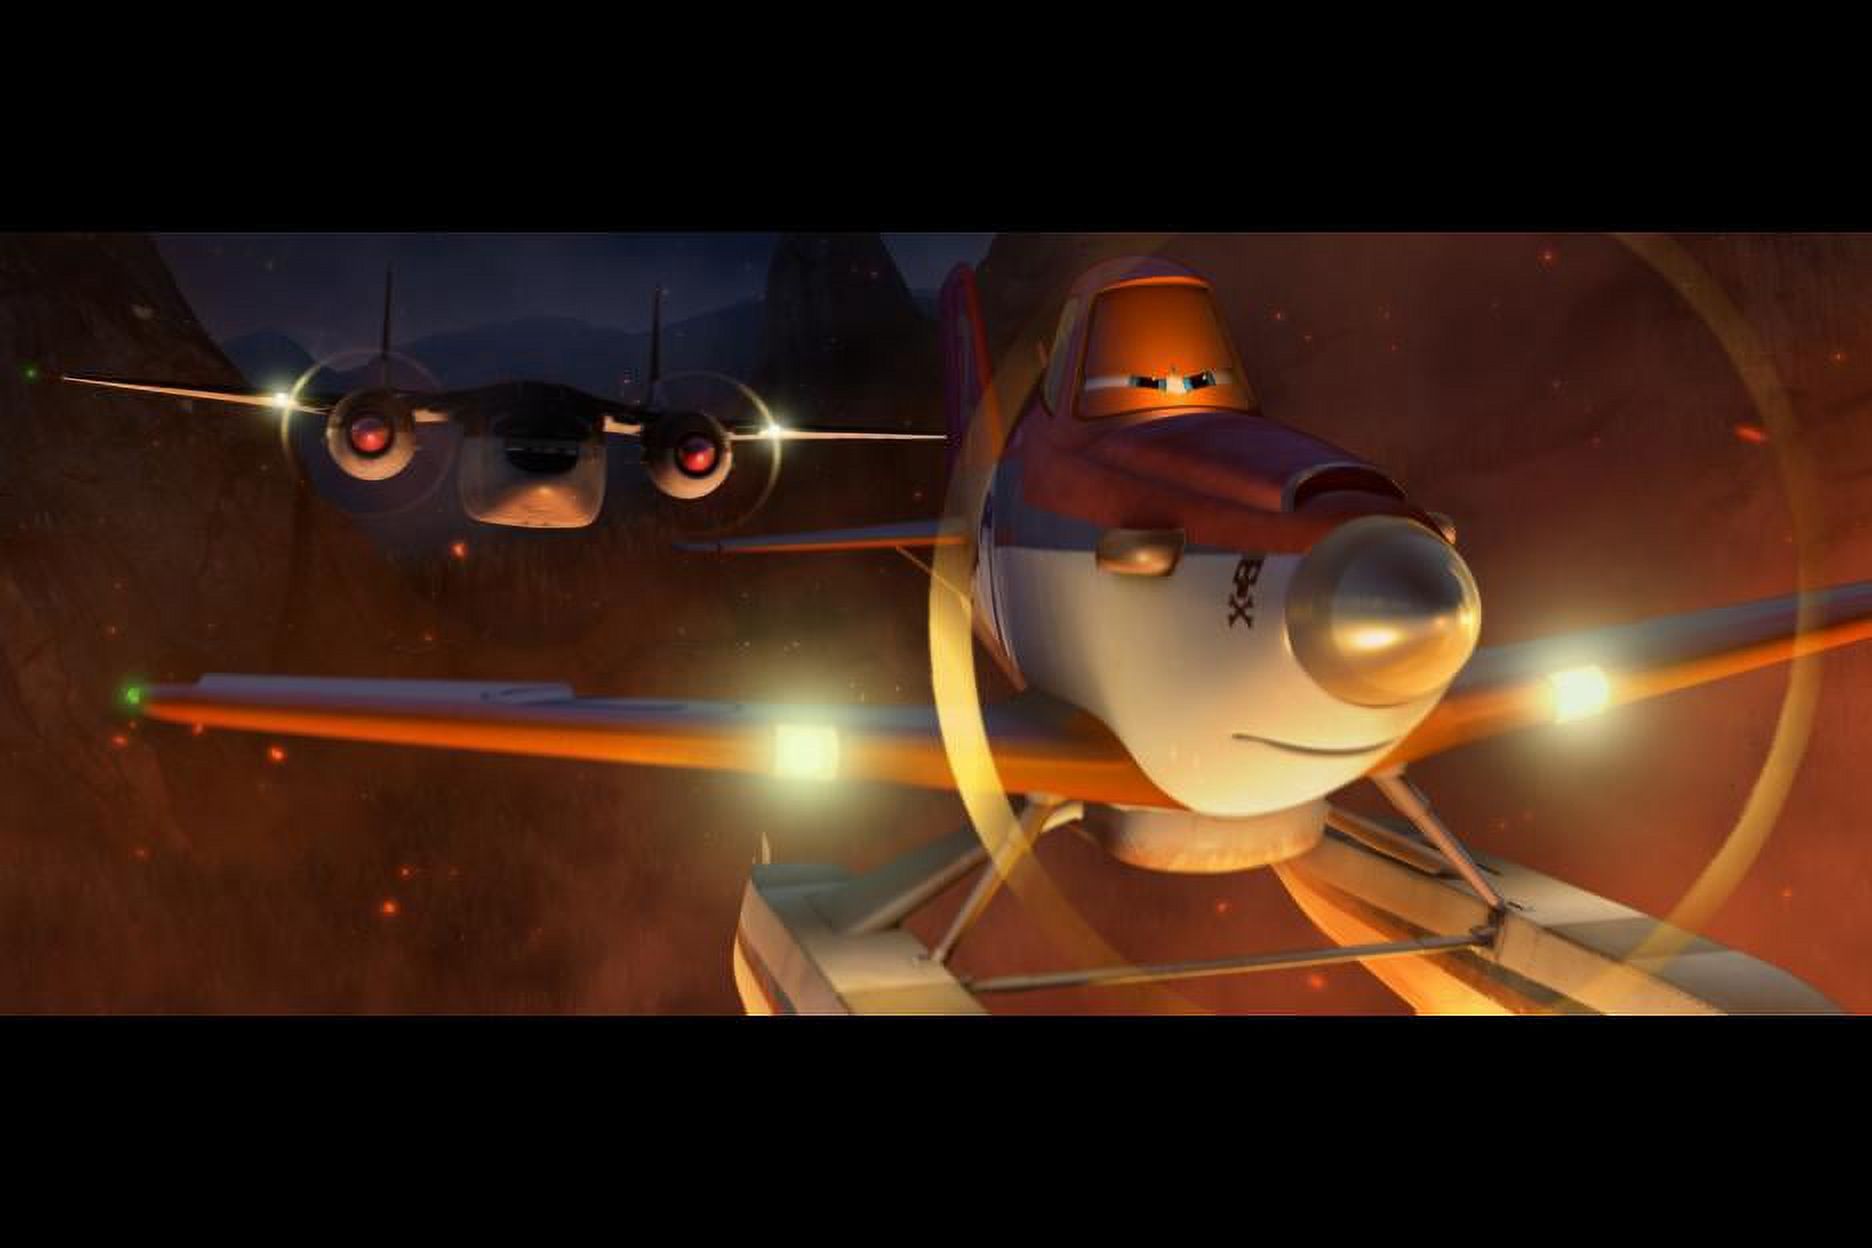 Planes Fire & Rescue (Blu-ray + DVD + Digital Code) - image 3 of 5